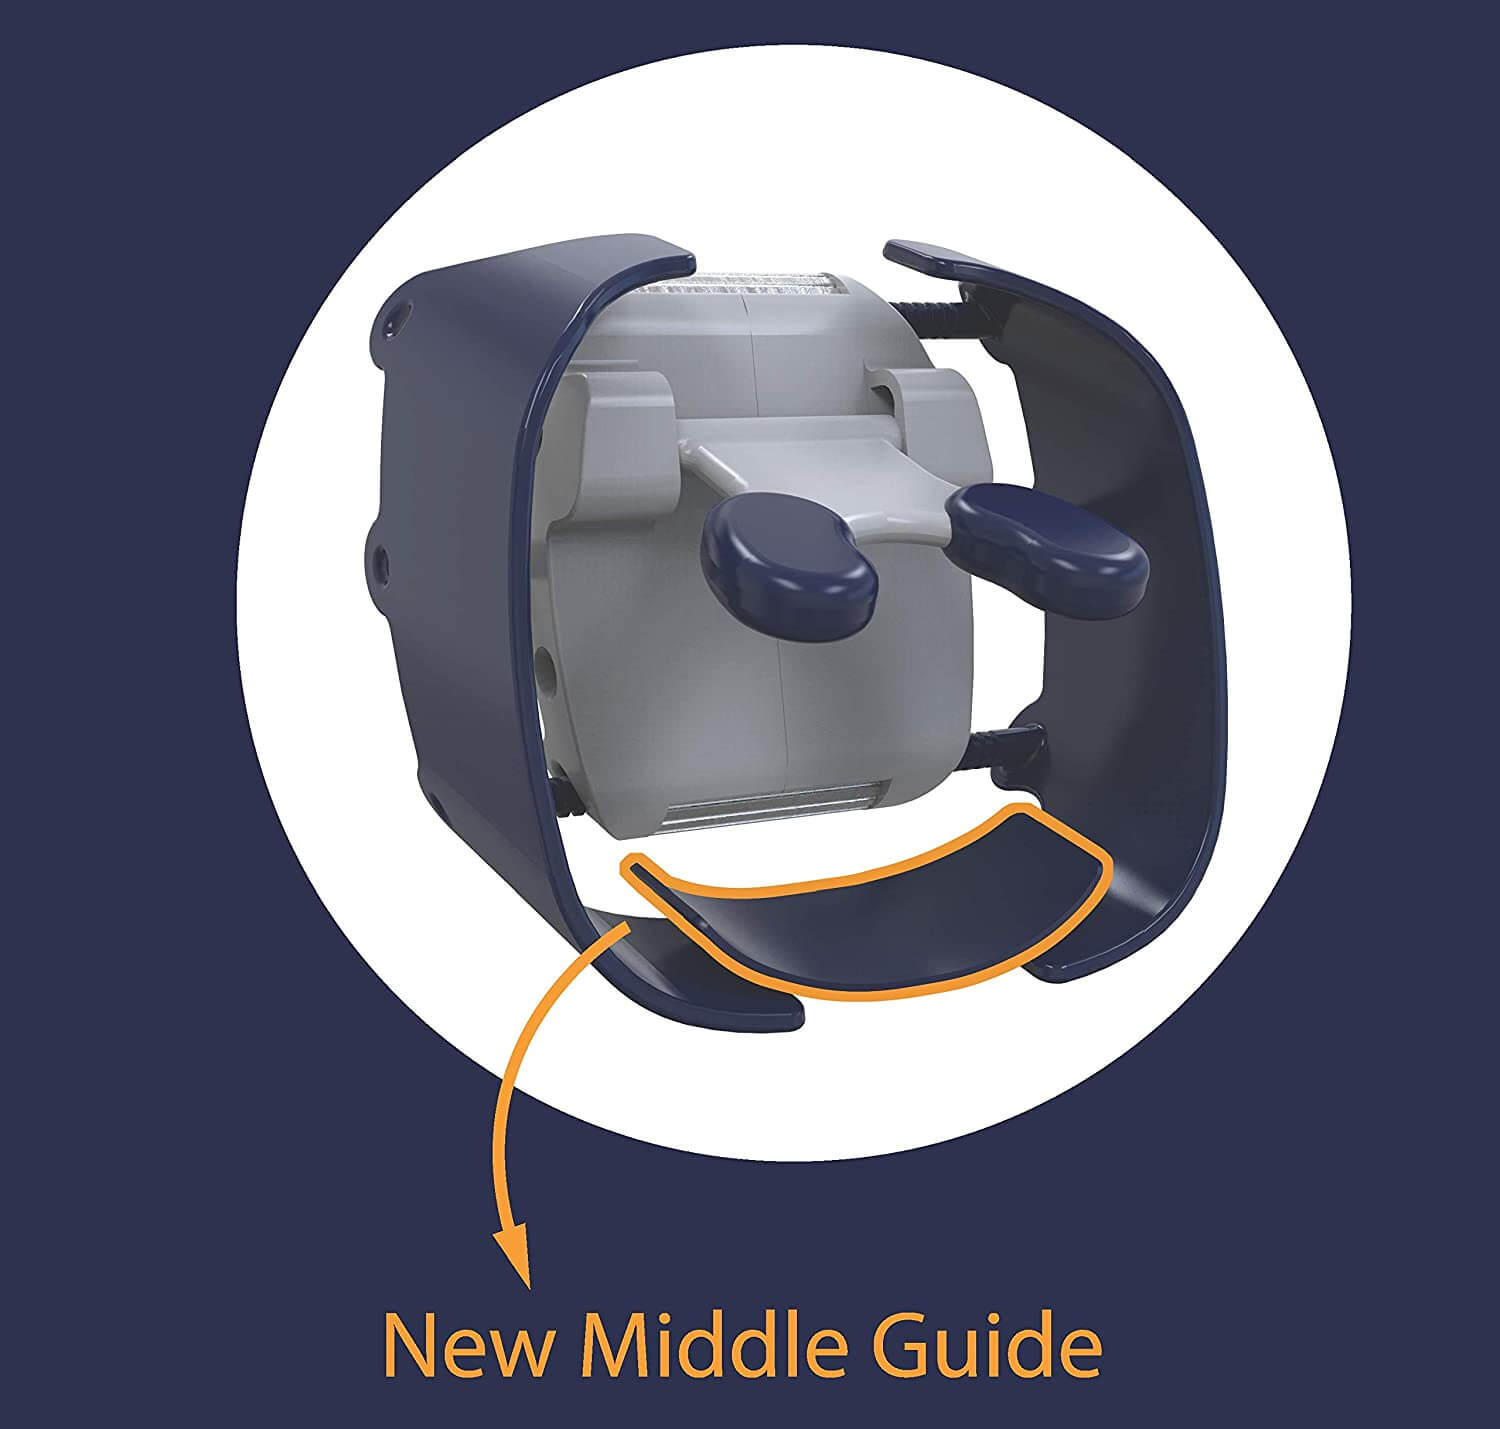 Goatee shaving template: New Middle Guide